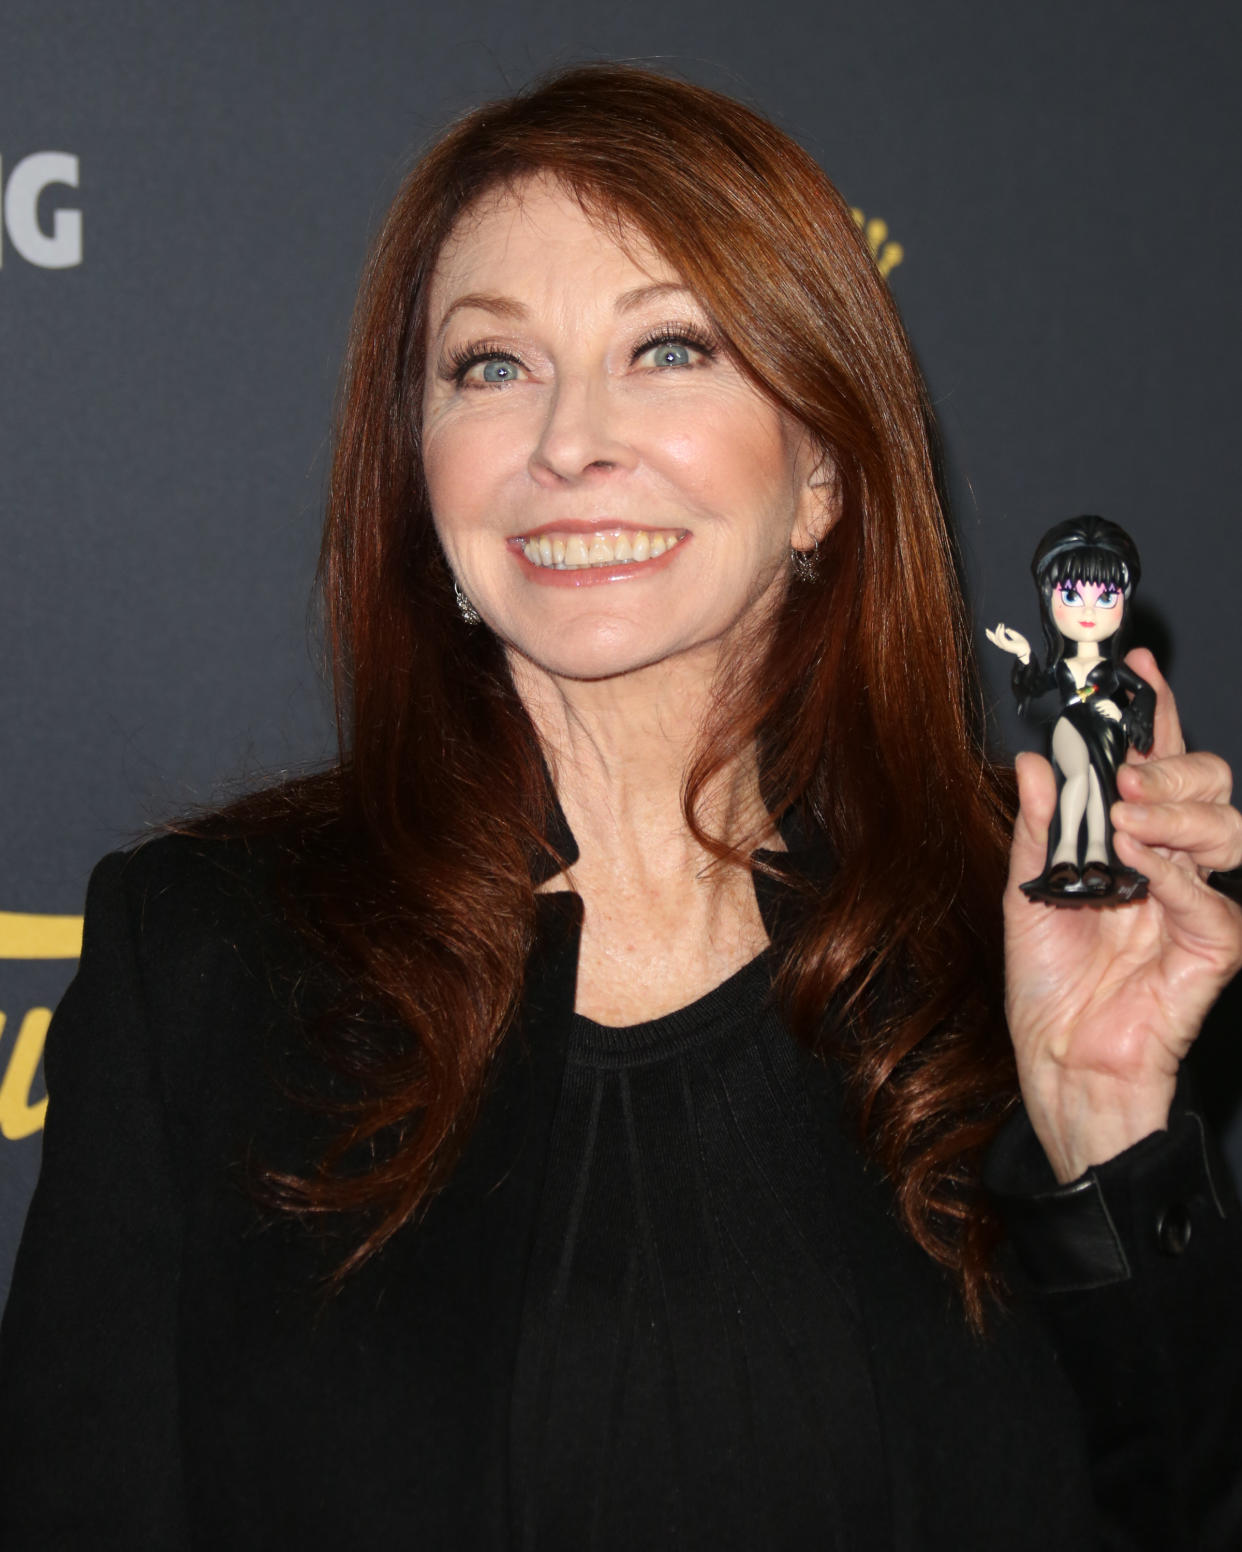 Cassandra Peterson with her alter ego in 2018.  (Photo: Paul Archuleta/Getty Images)